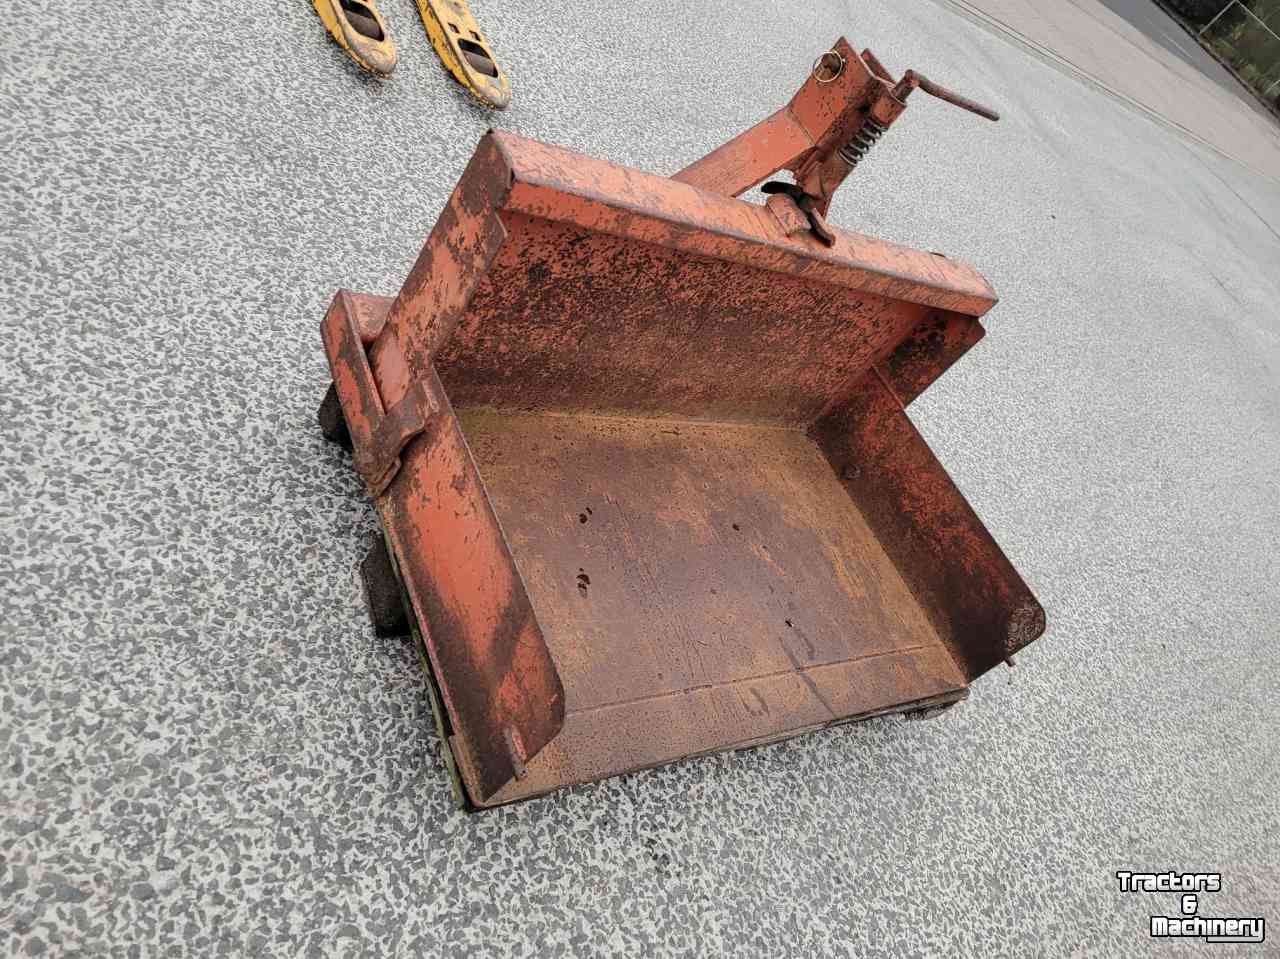 Tractor tipping boxes Jako Grondbak 120